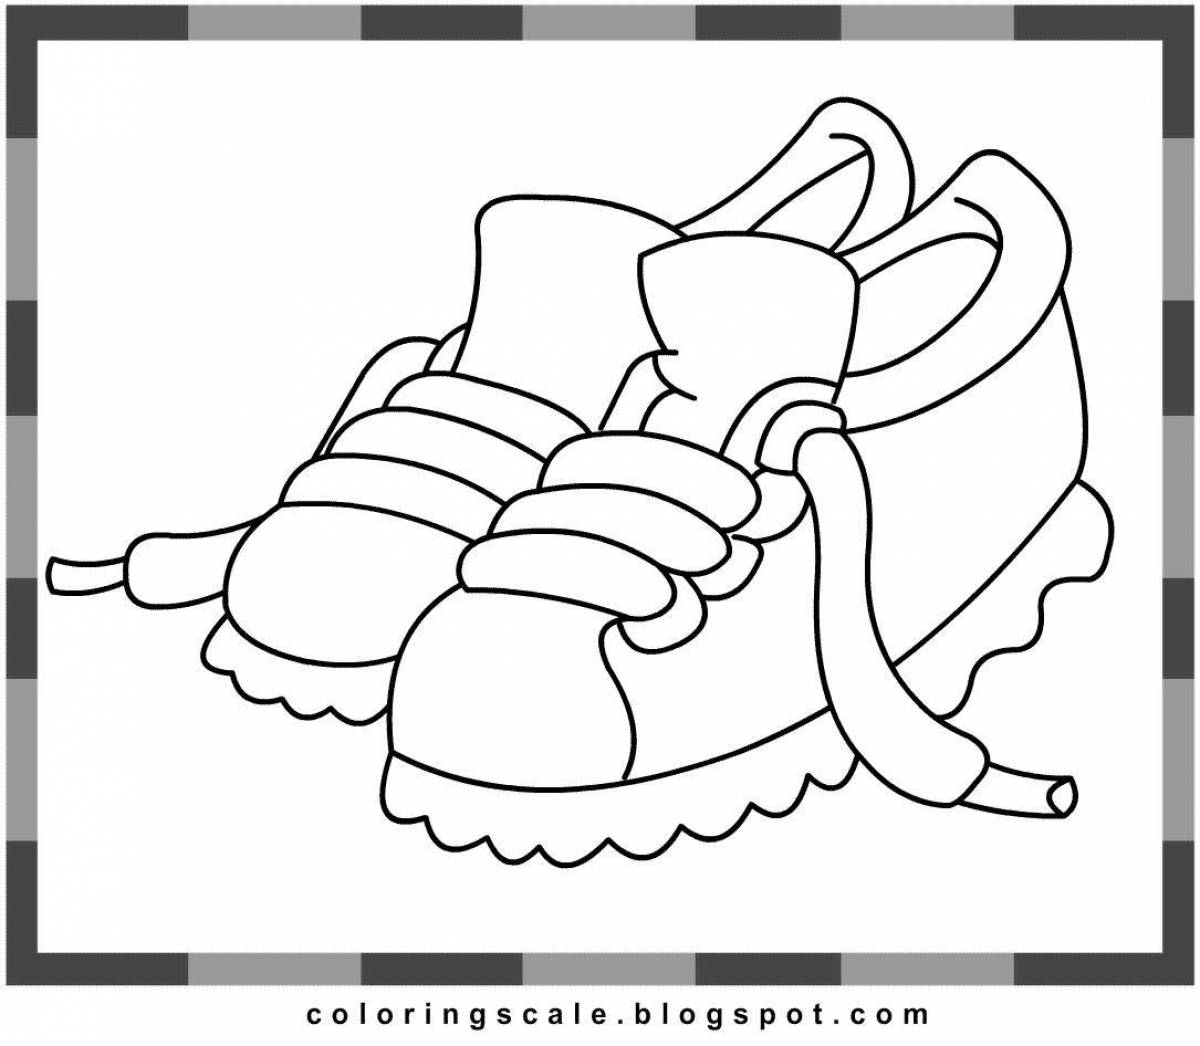 Fancy shoes coloring page for 3-4 year olds